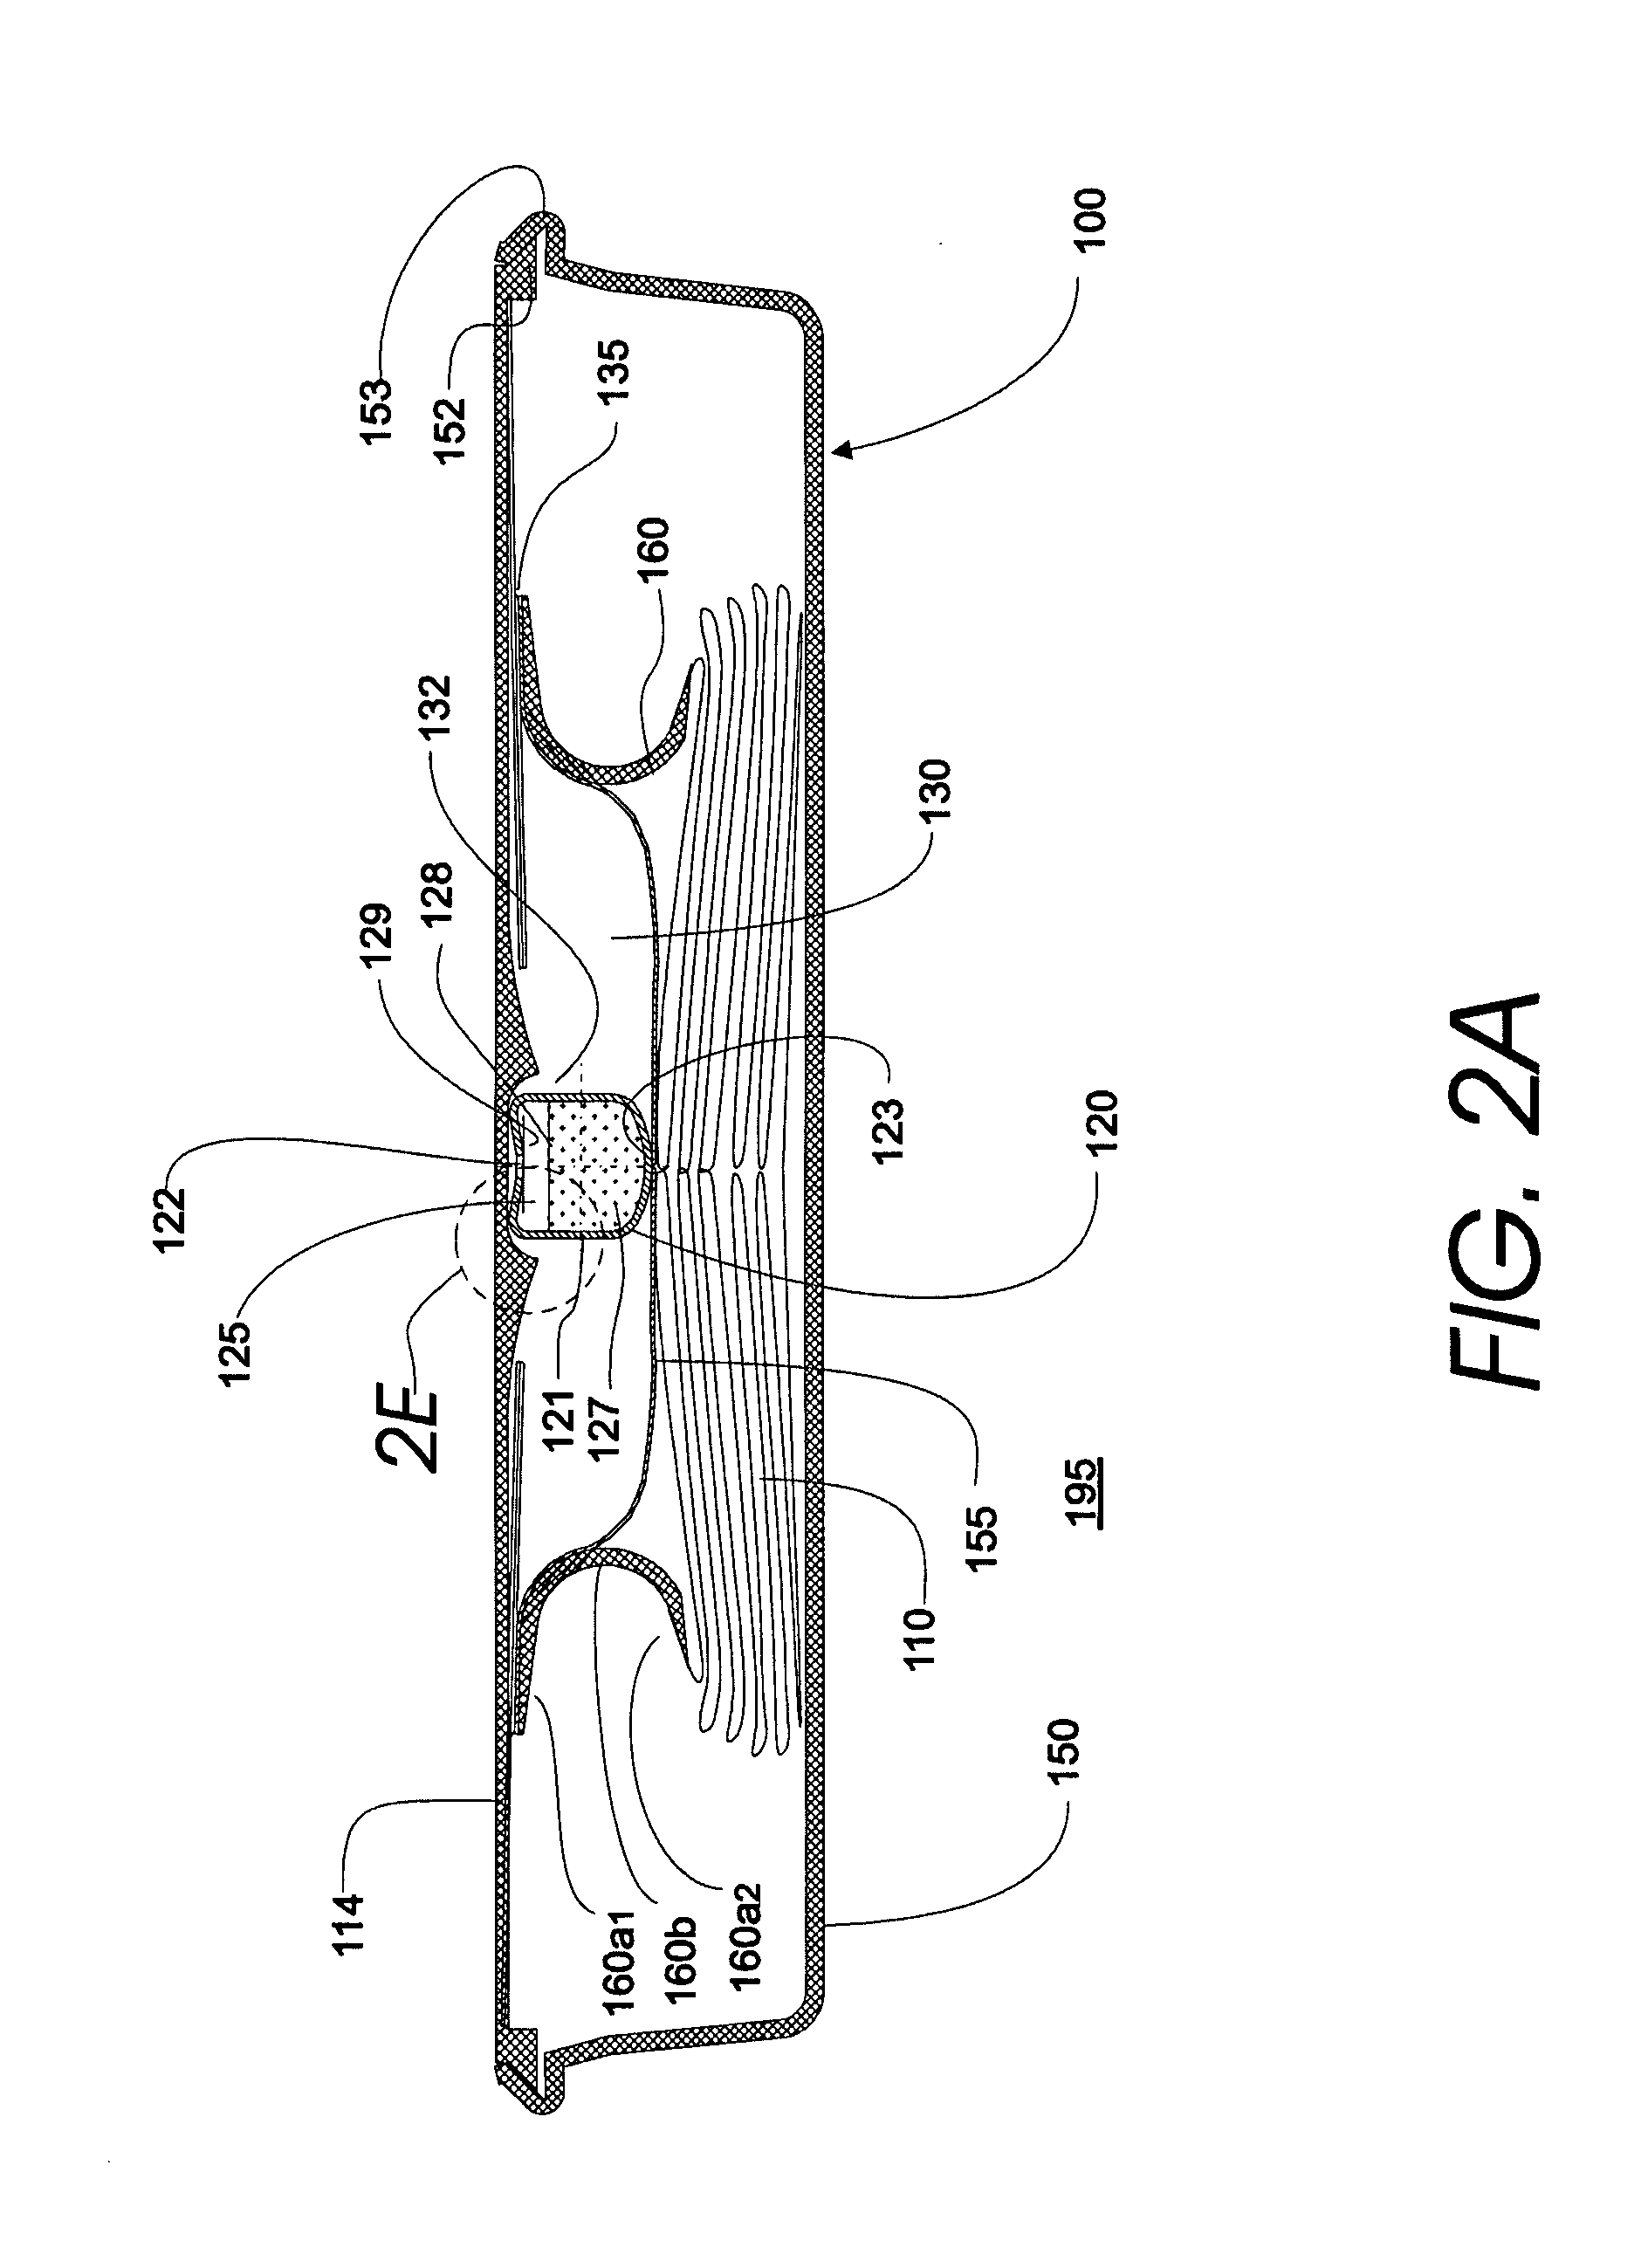 Electronics-Containing Airbag Module